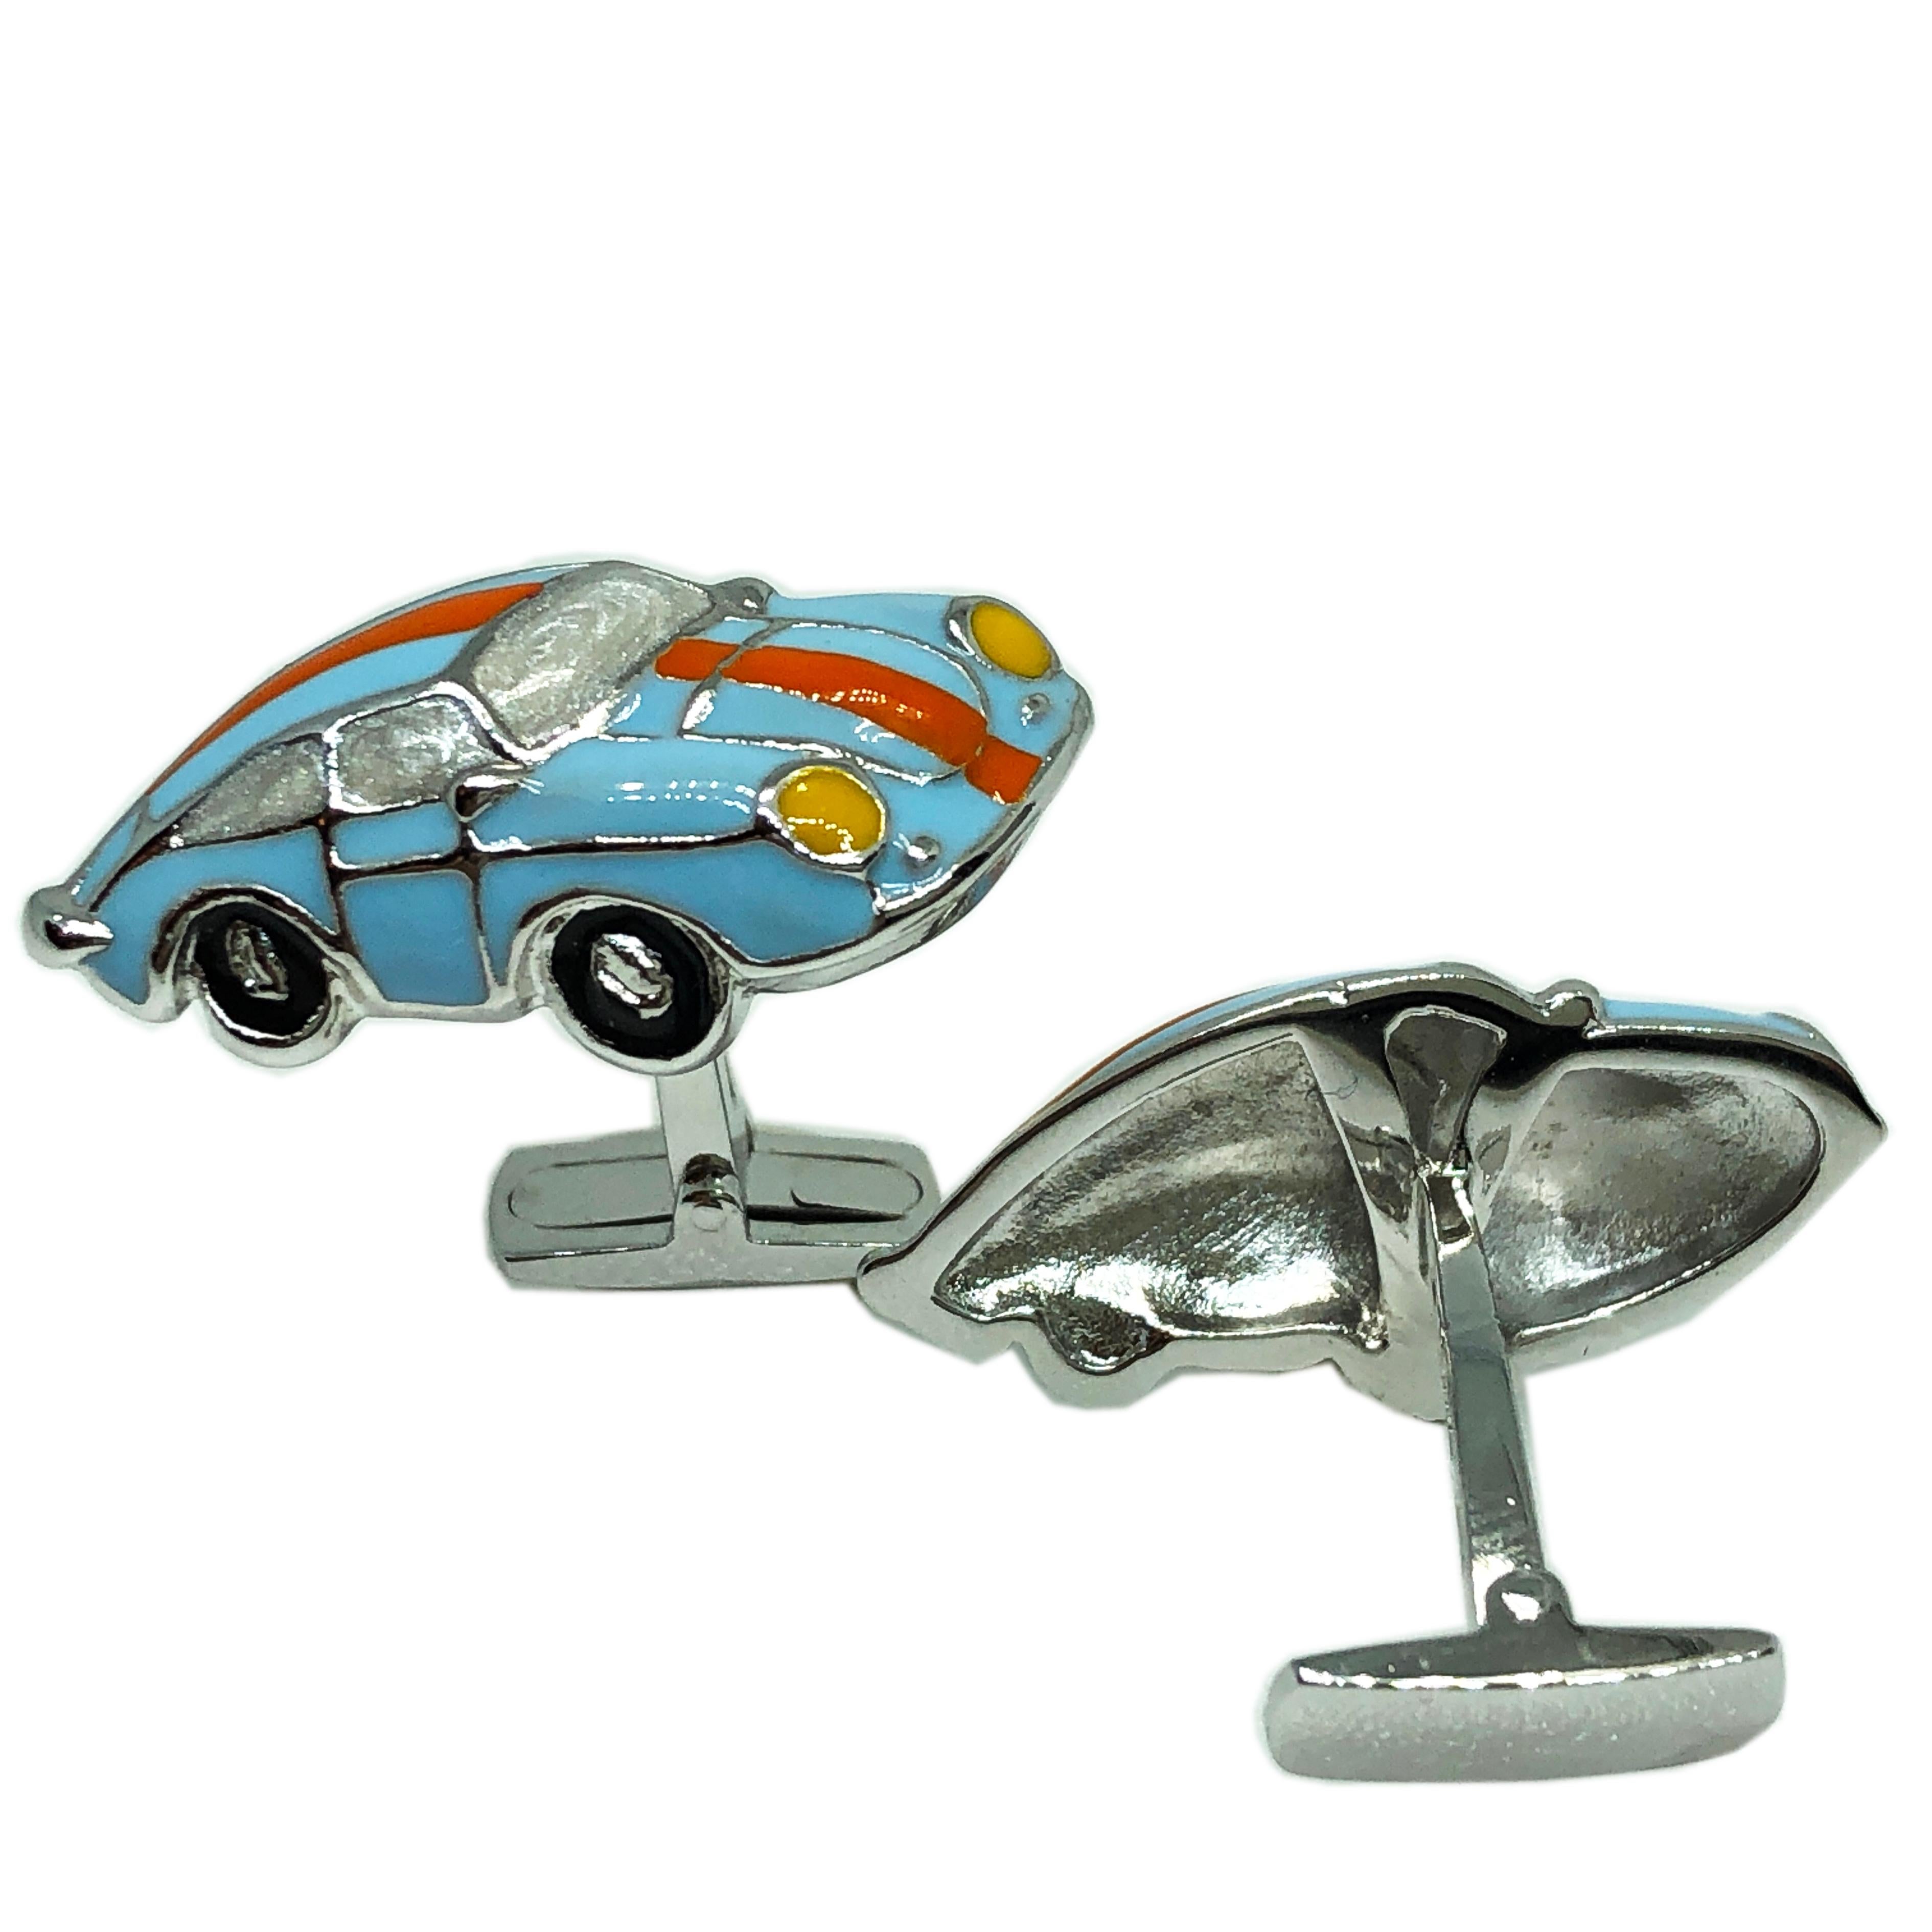 Berca Le Man Racing Color 911 Porsche Shaped Enameled Sterling Silver Cufflinks 3